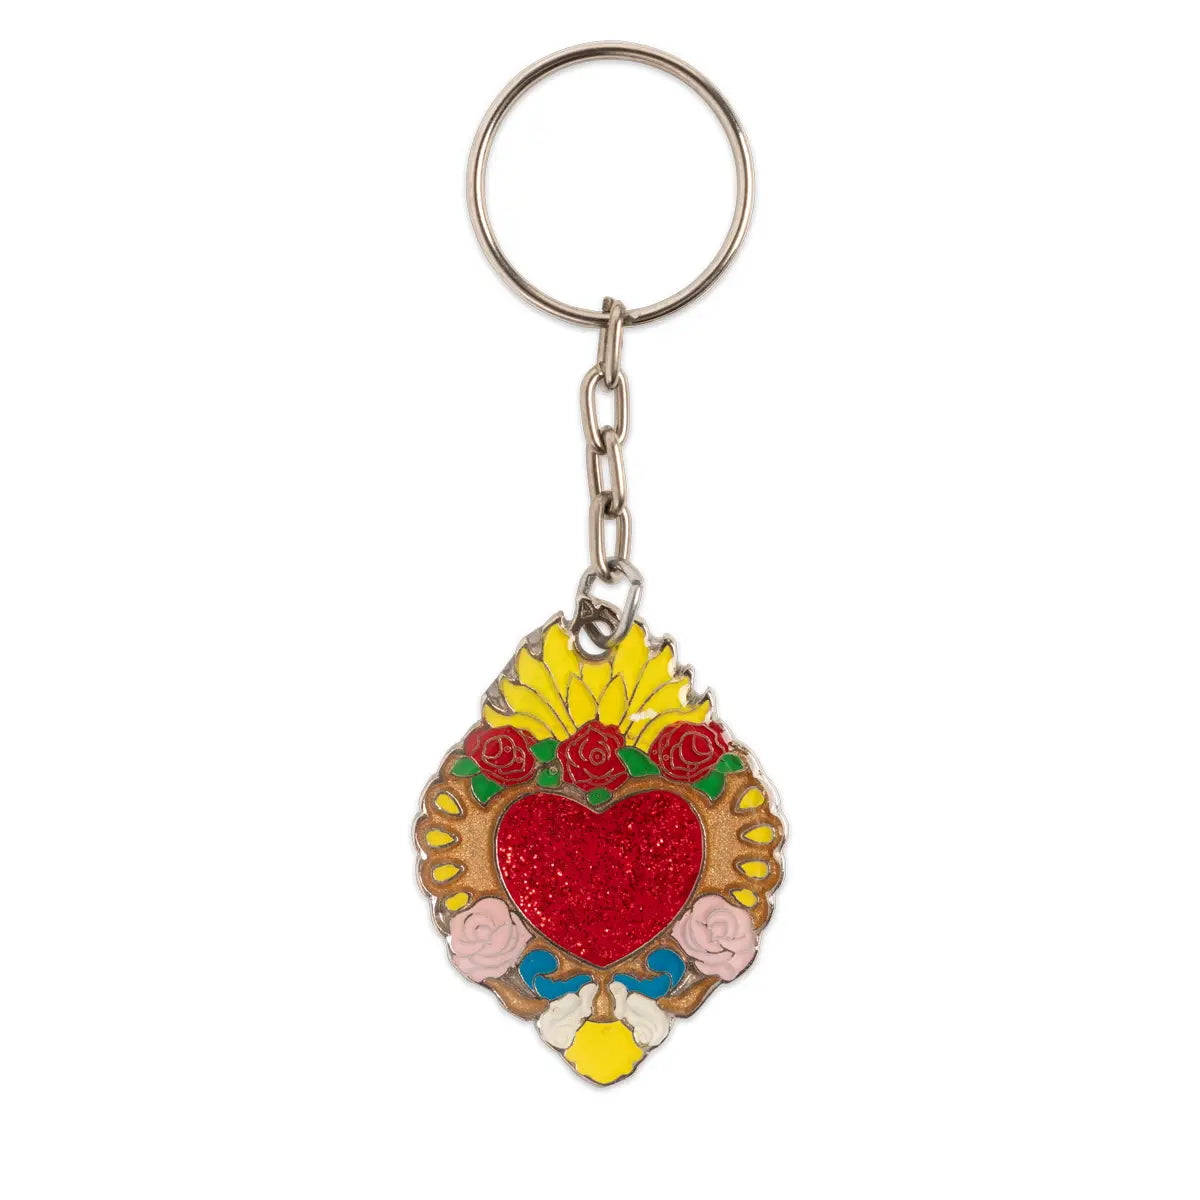 Enamel Sacred Heart keychain featuring a red heart, three red roses, two pink roses and yellow flames.